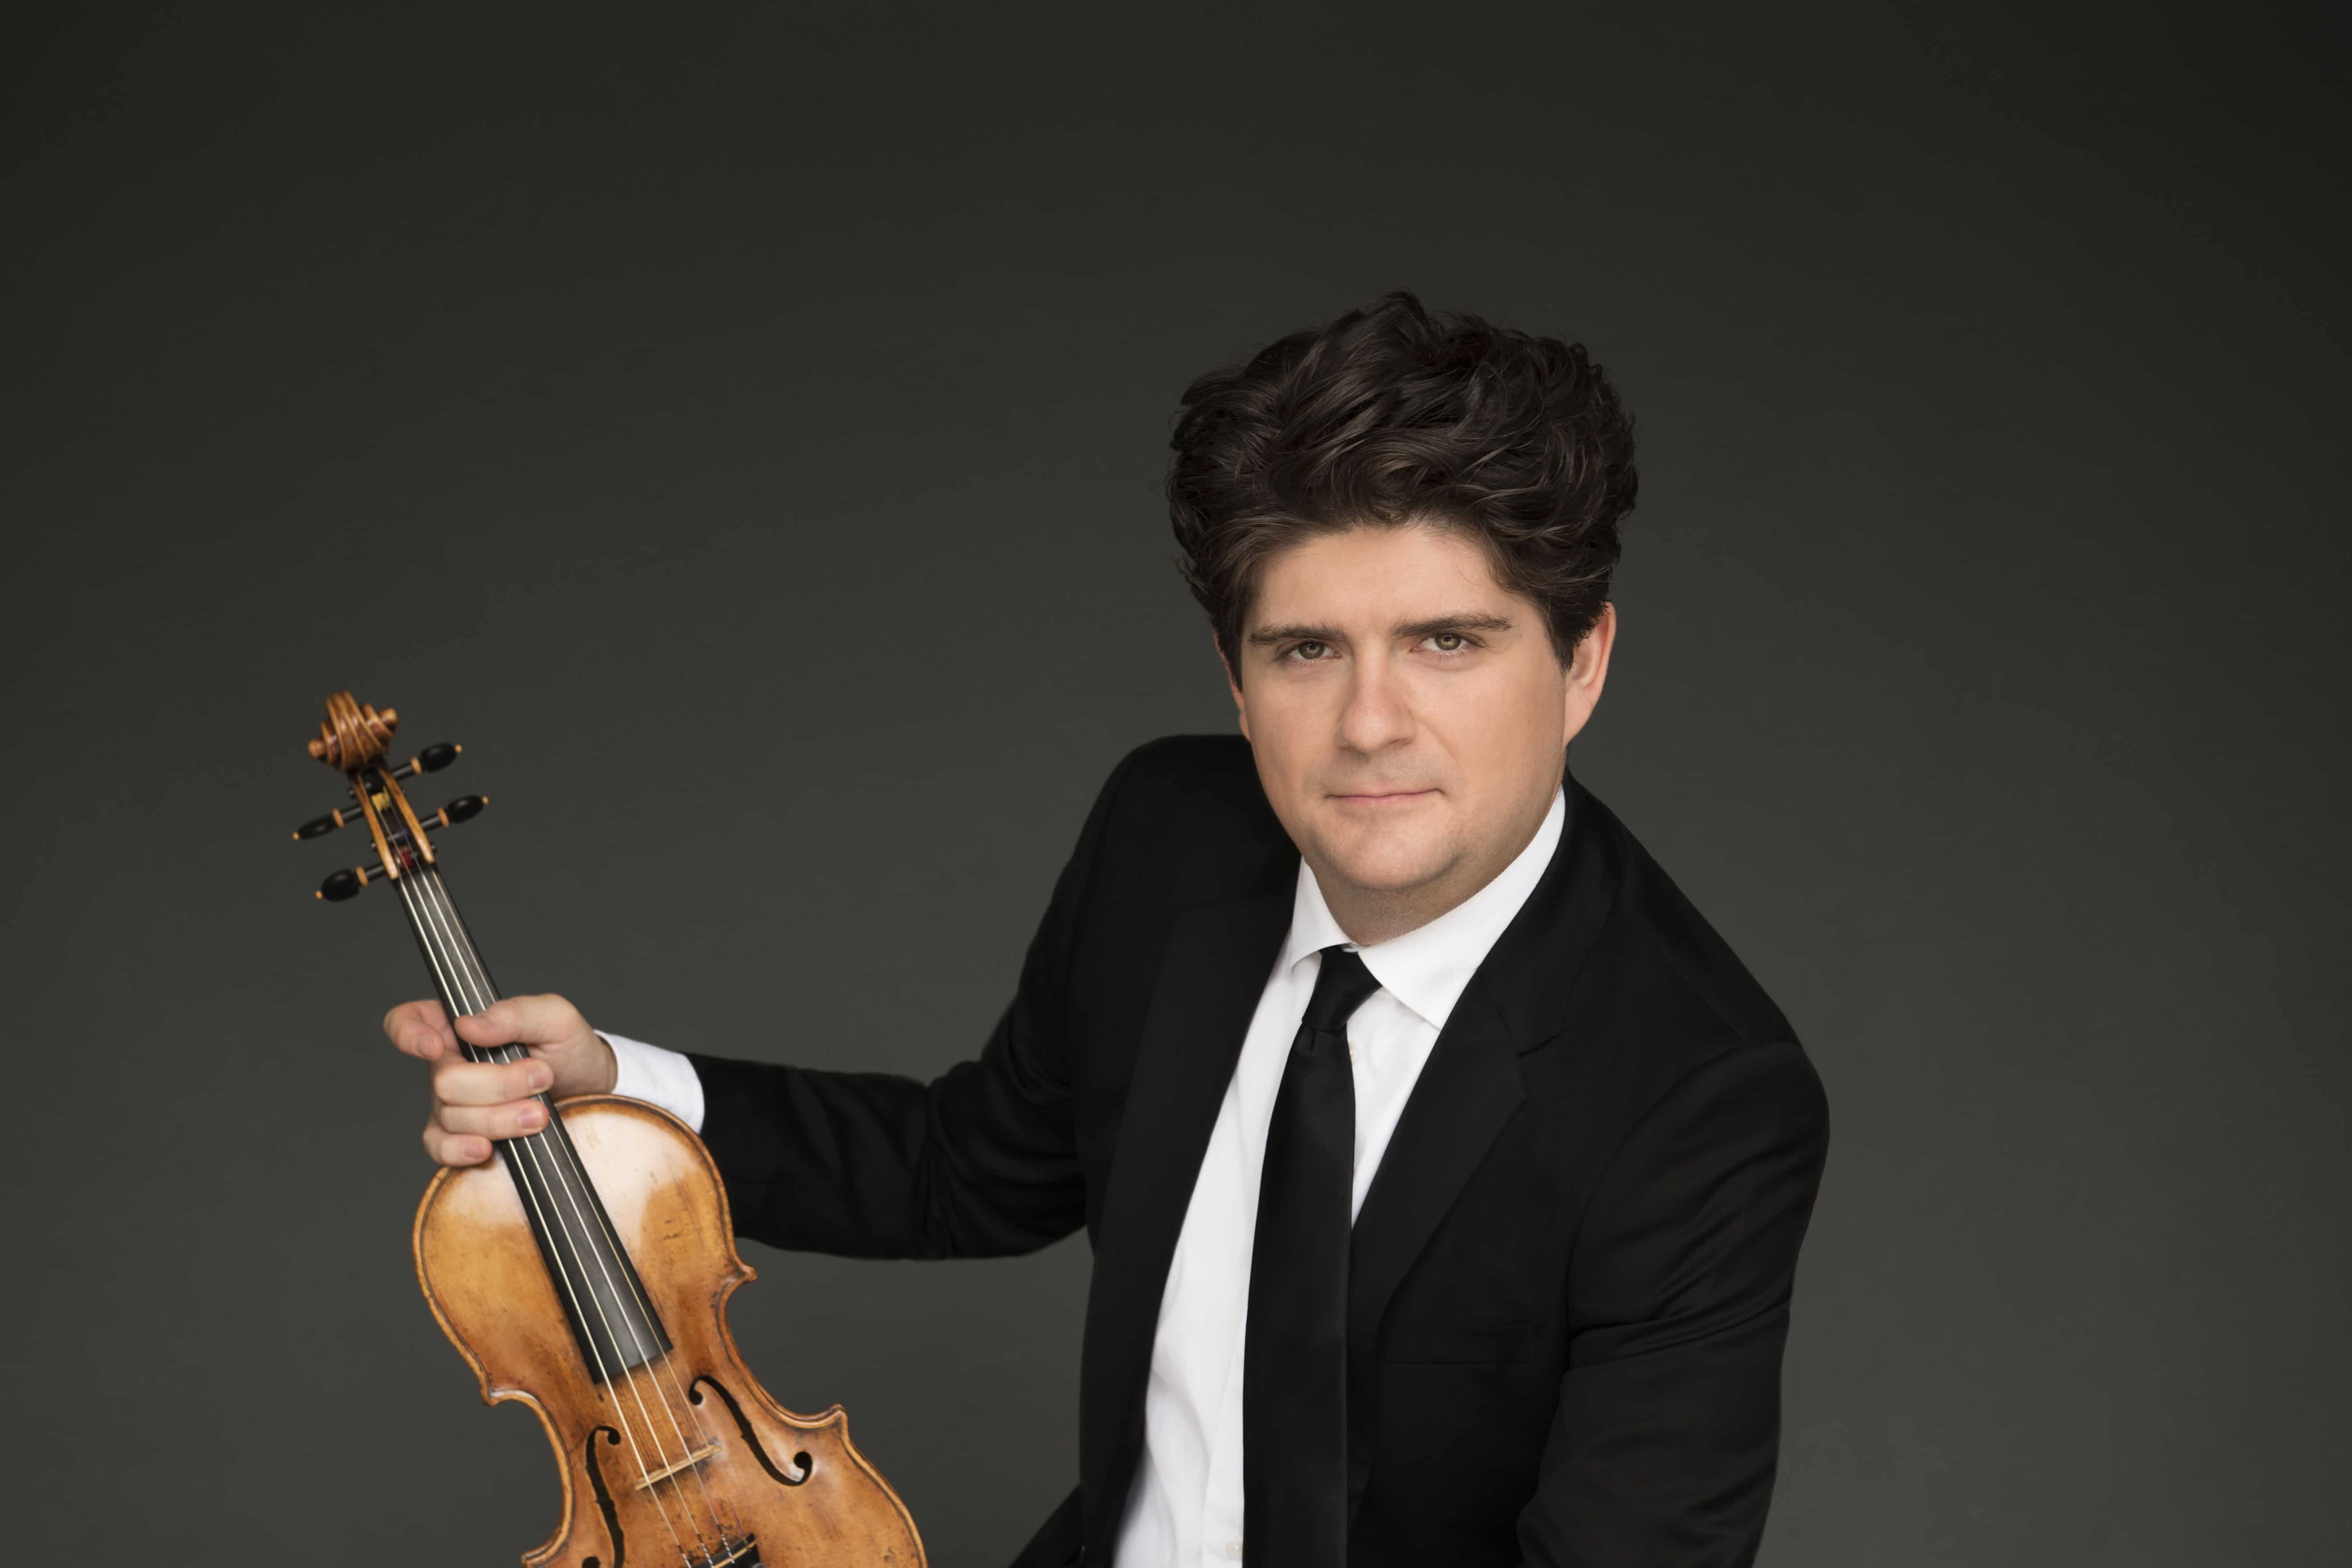 Concertmaster drops out in Vienna